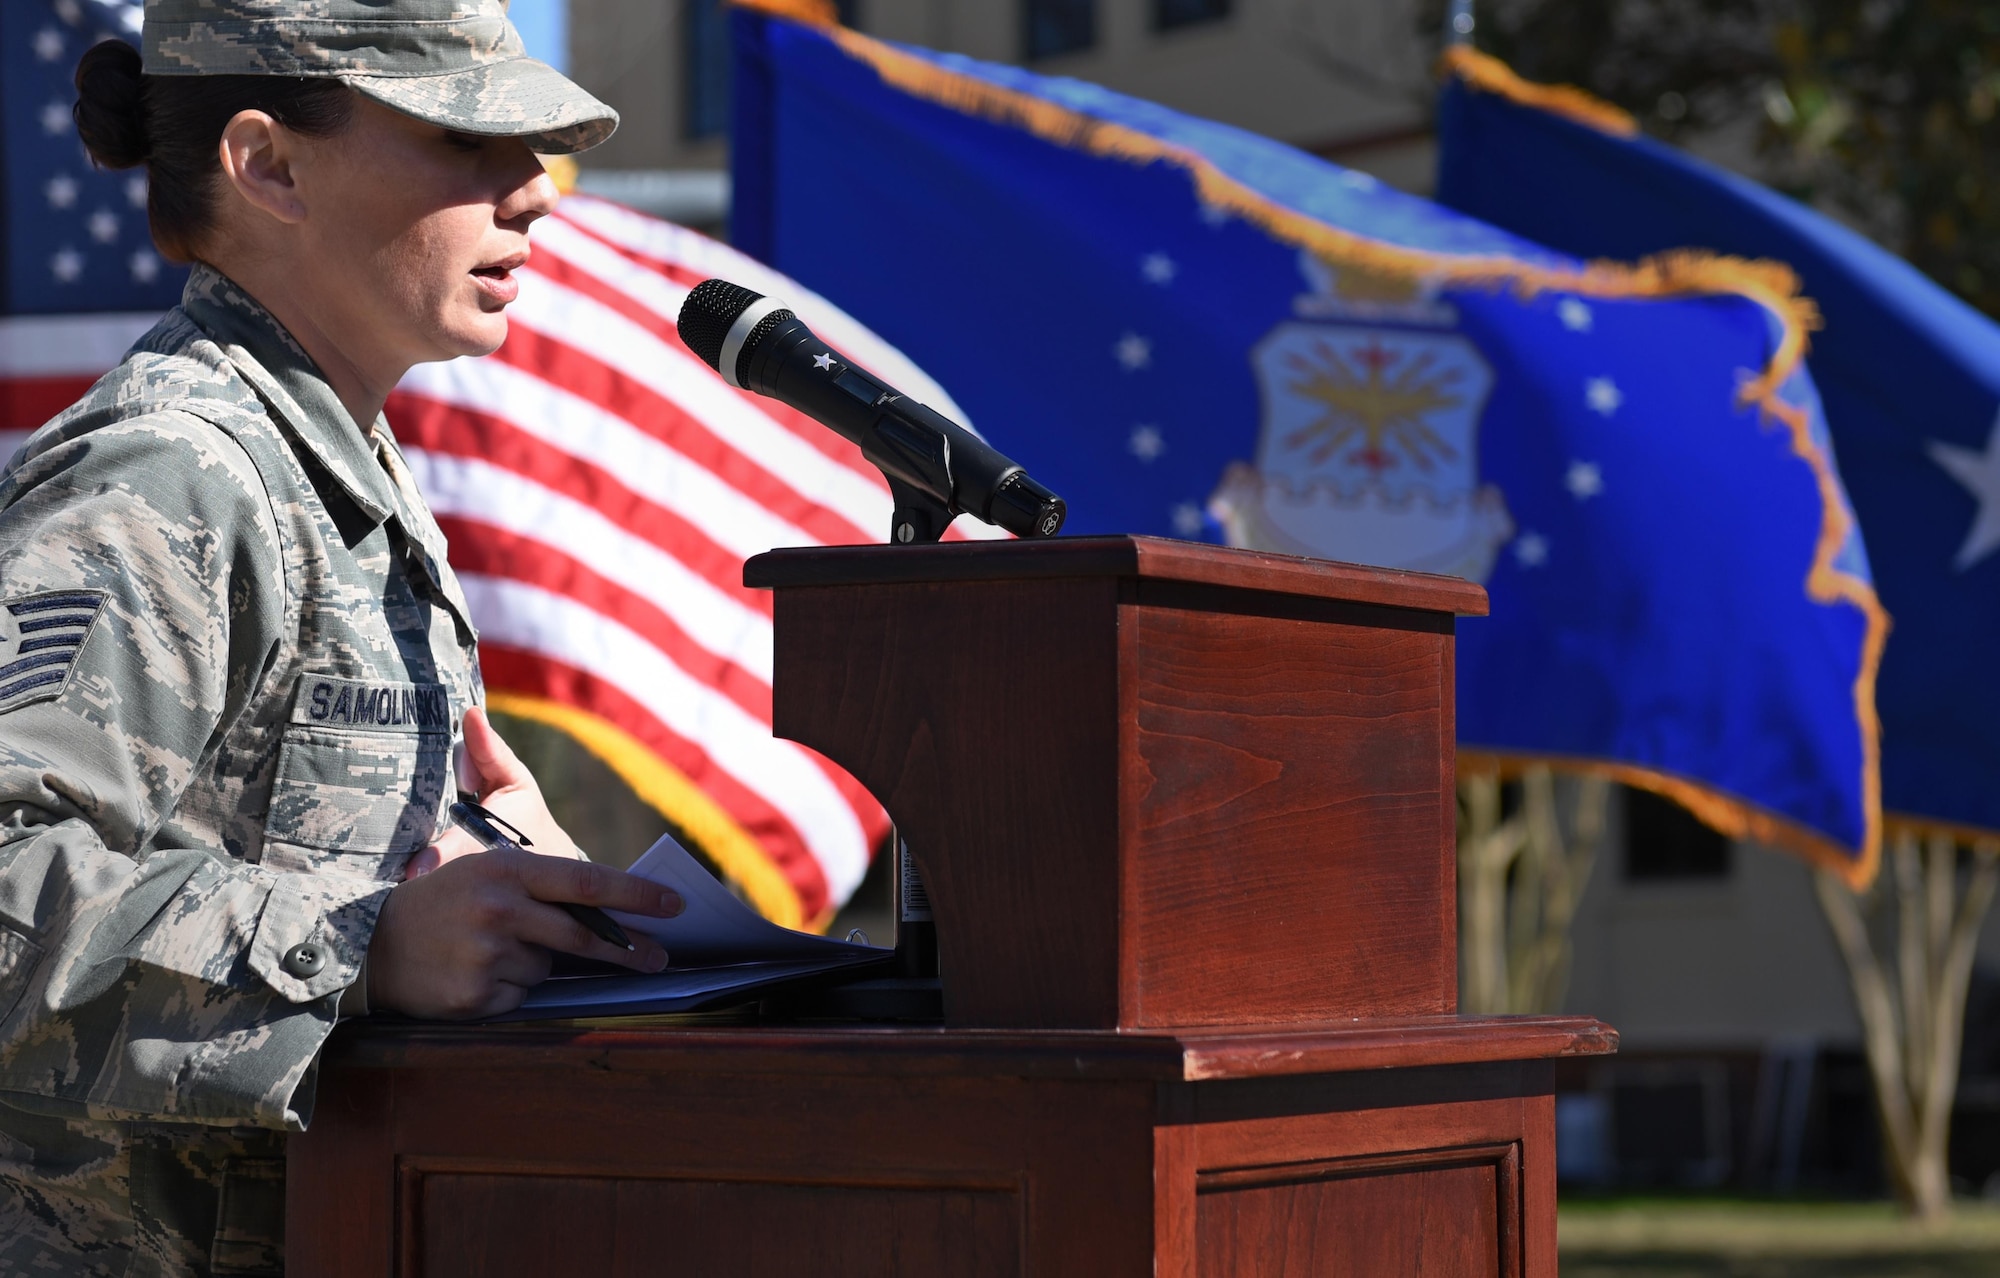 Tech. Sgt. Robin Samolinski, 8th Air Force executive assistant to the command chief, speaks during a building dedication and cake cutting ceremony at Barksdale Air Force Base, La., Feb. 2, 2017. The 8th AF headquarters building was dedicated to General James H. “Jimmy” Doolittle during a series of 8th AF 75th diamond anniversary events. On Feb. 1, the Eighth celebrated its 75th anniversary, and former and current “Mighty Eighth” Airmen from across the country came to Barksdale AFB to take part in the celebration. (U.S. Air Force photo by Senior Airman Erin Trower) 